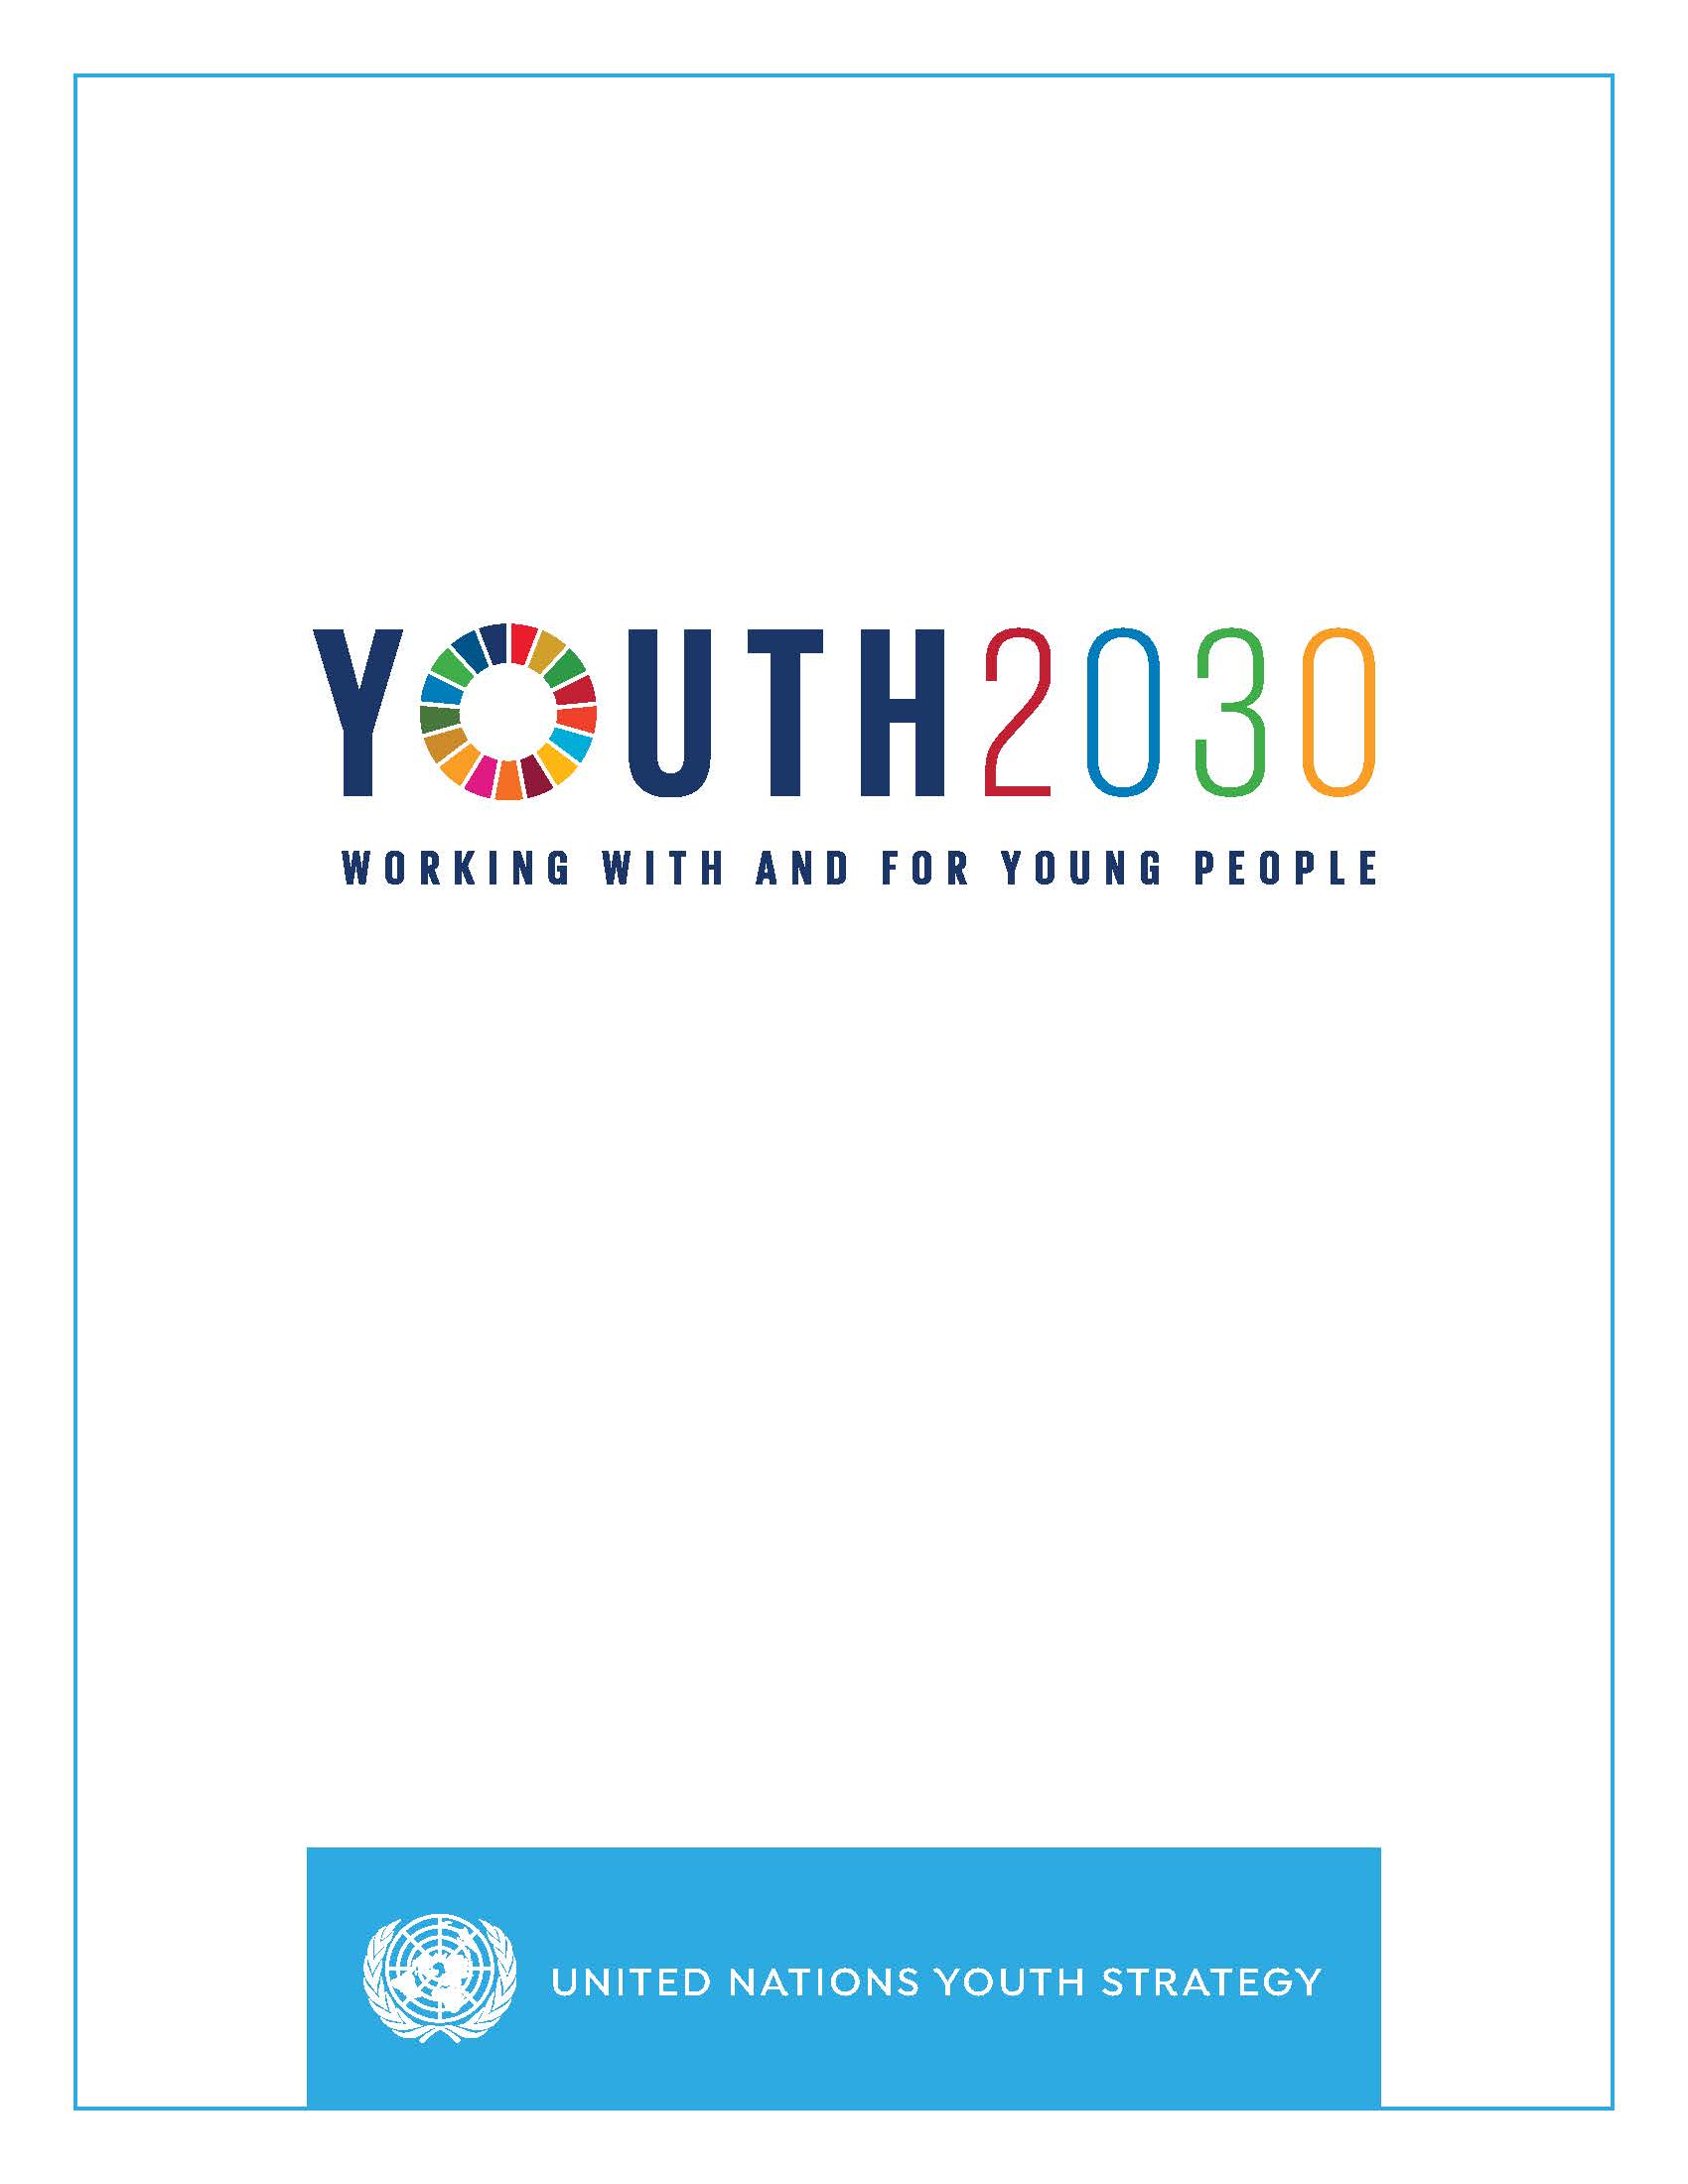 YOUTH 2030